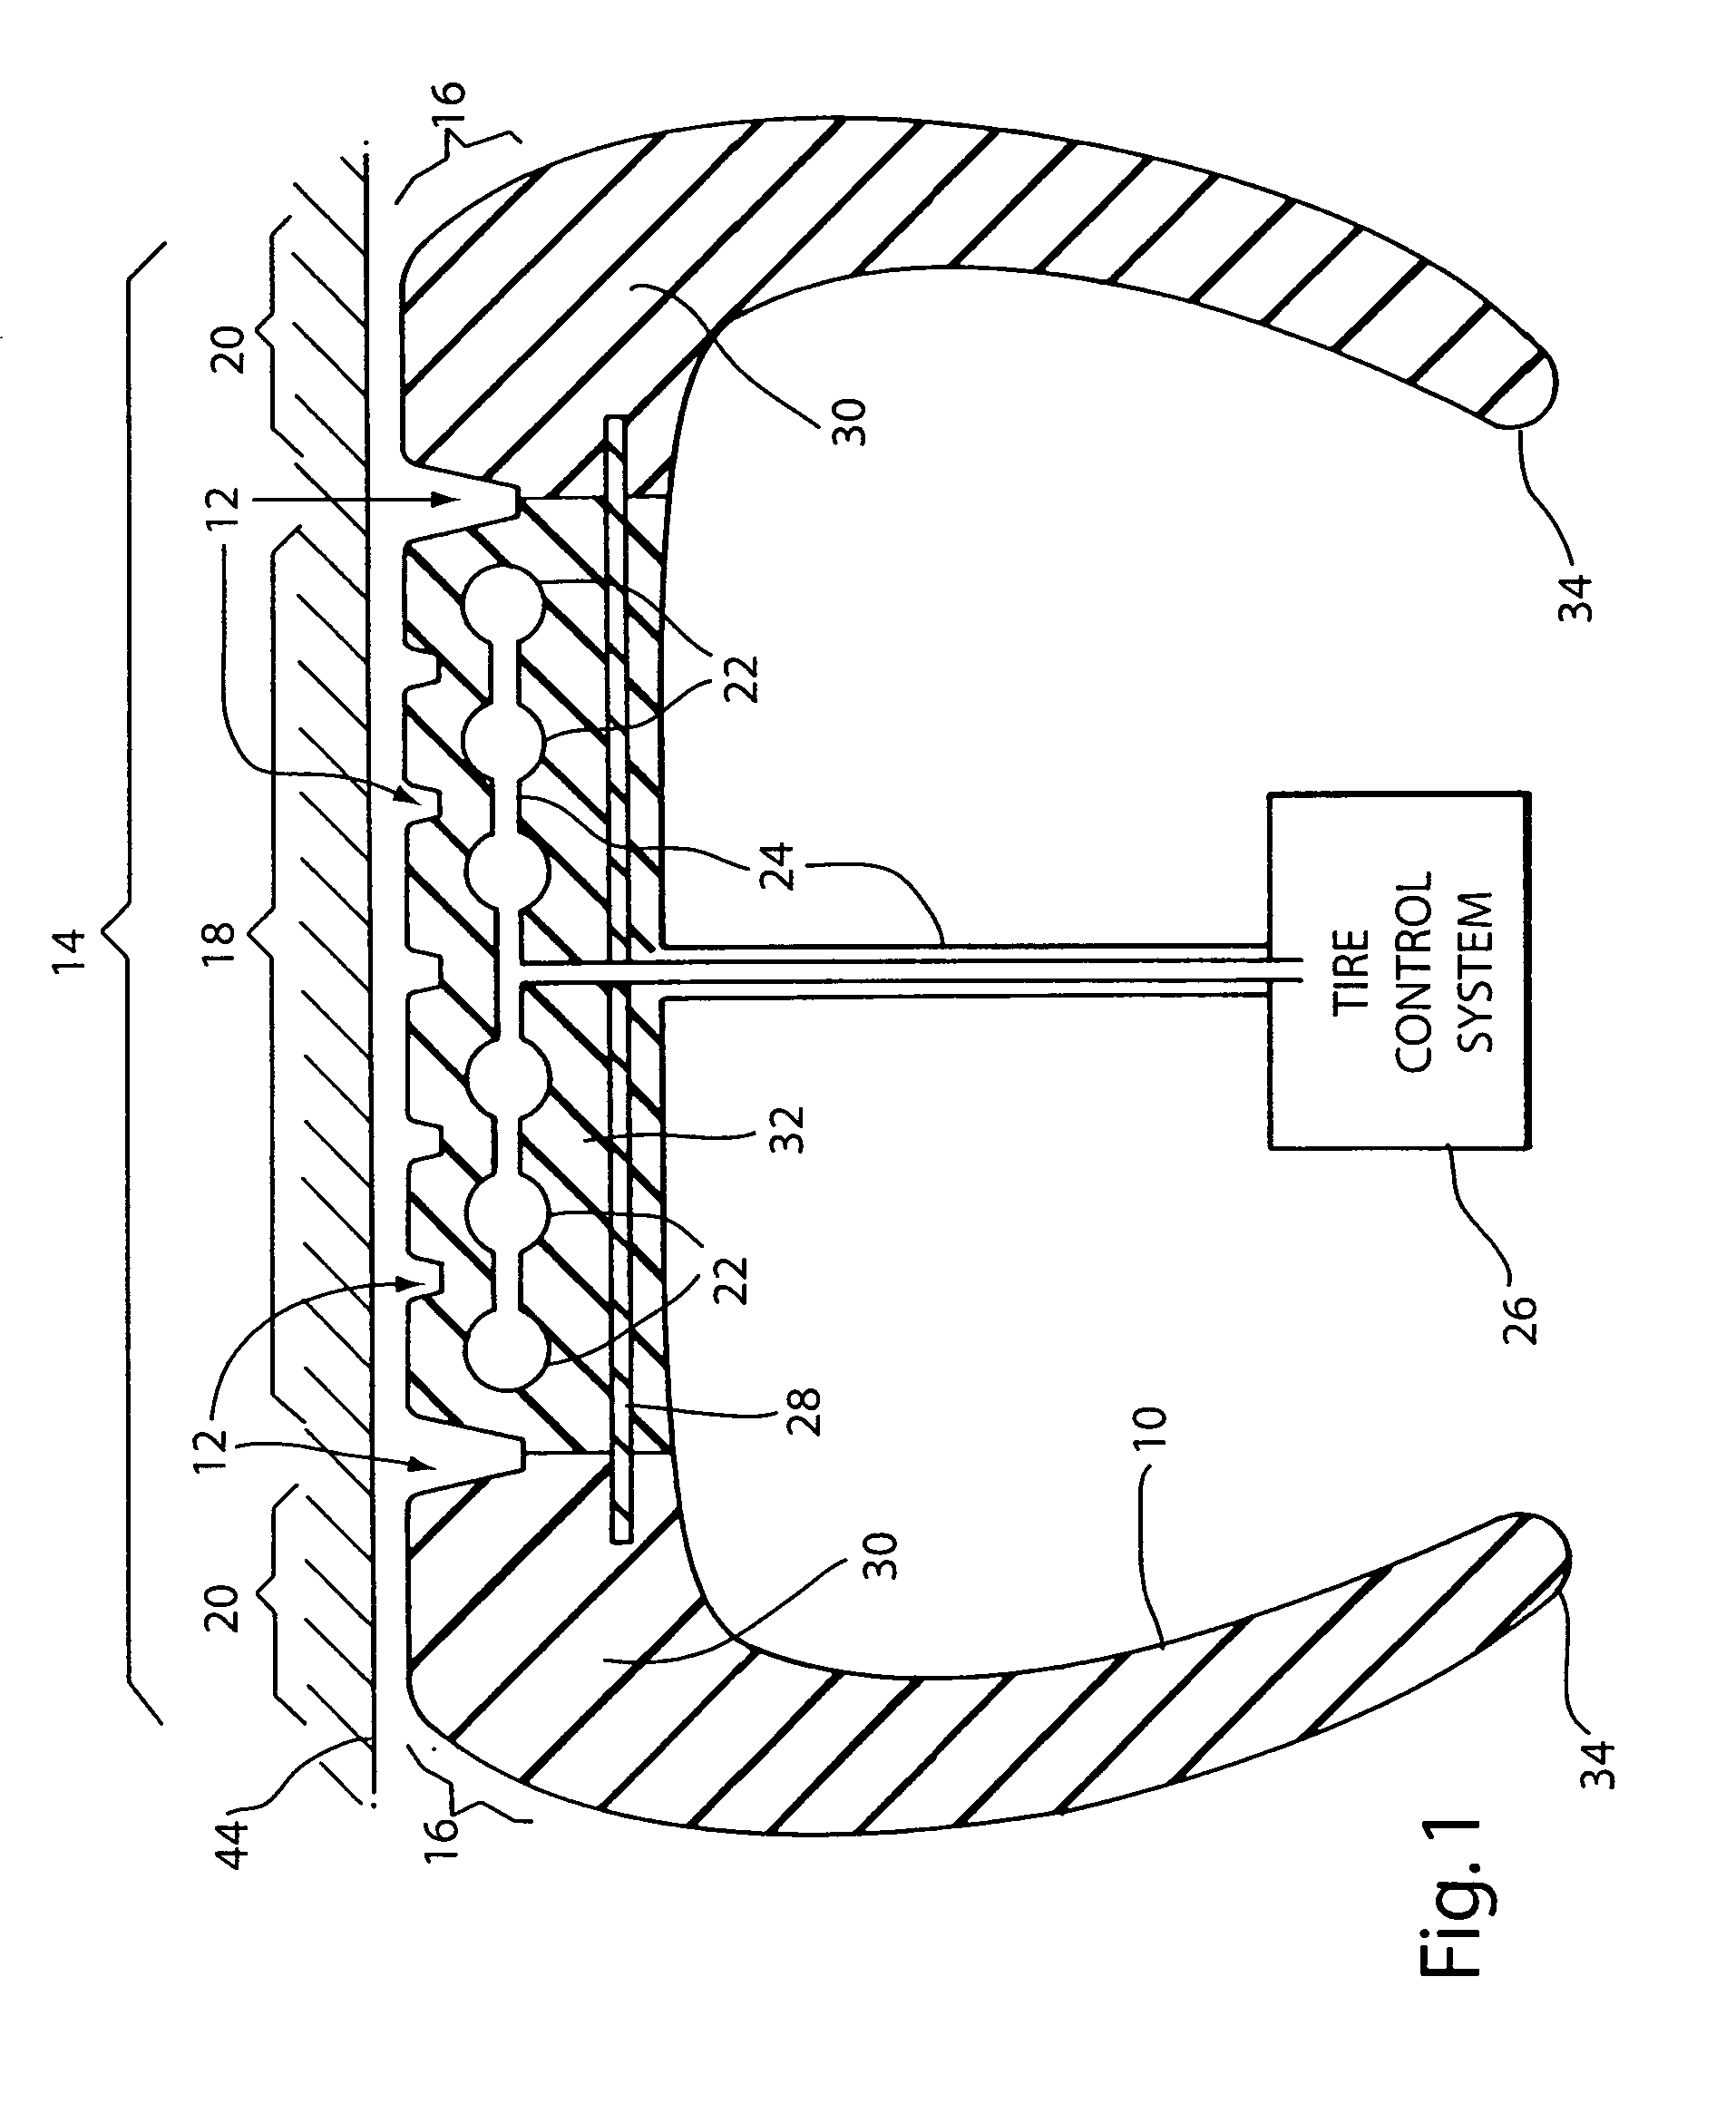 Fuel efficient vehicle tire having a variable footprint and low rolling resistance